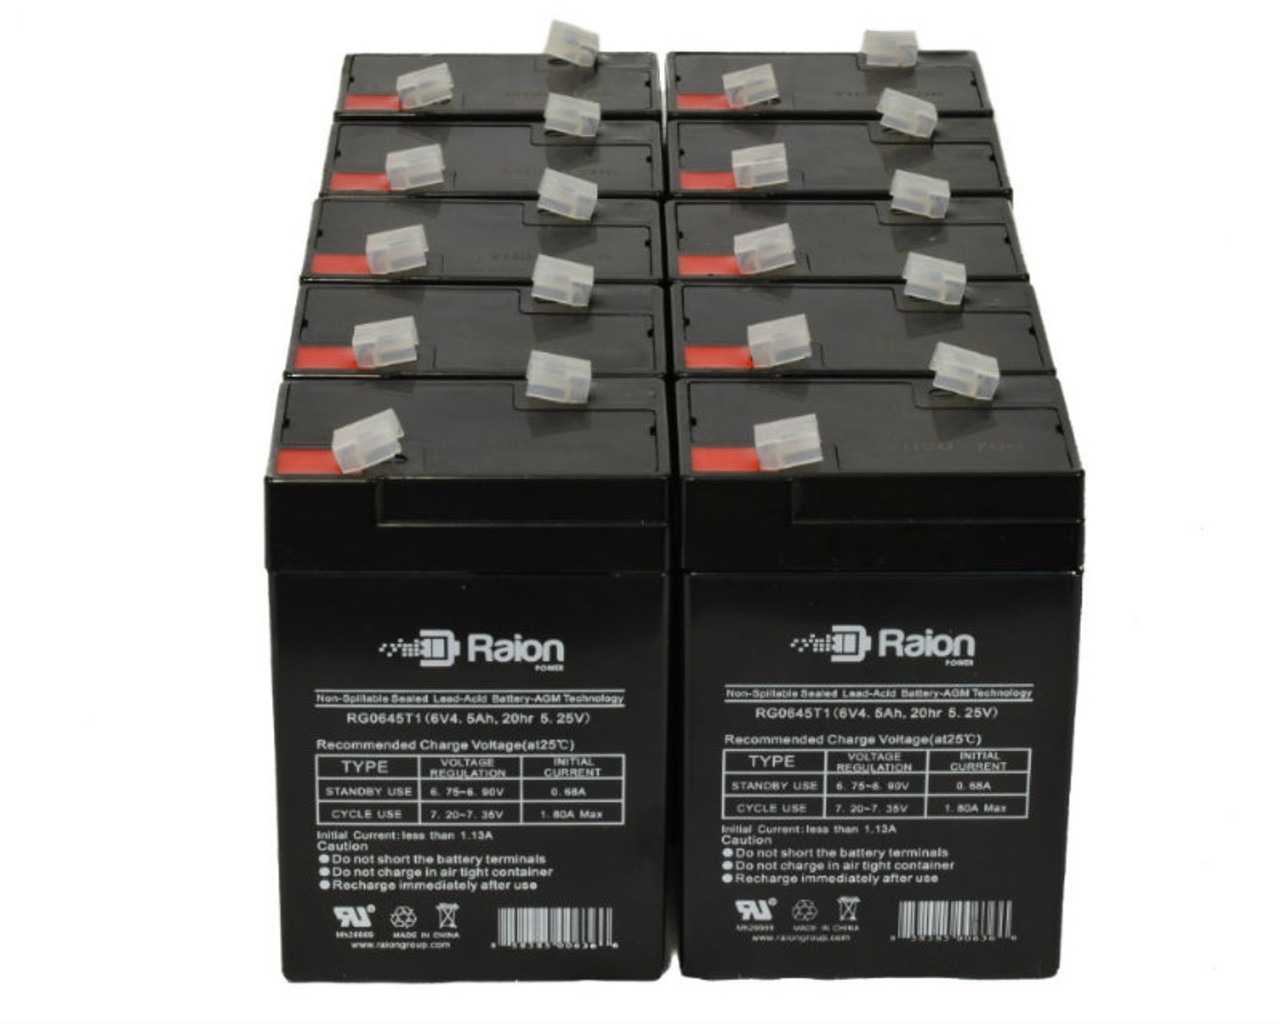 Raion Power 6V 4.5Ah Replacement Emergency Light Battery for Sure-Lites RLM1 - 10 Pack